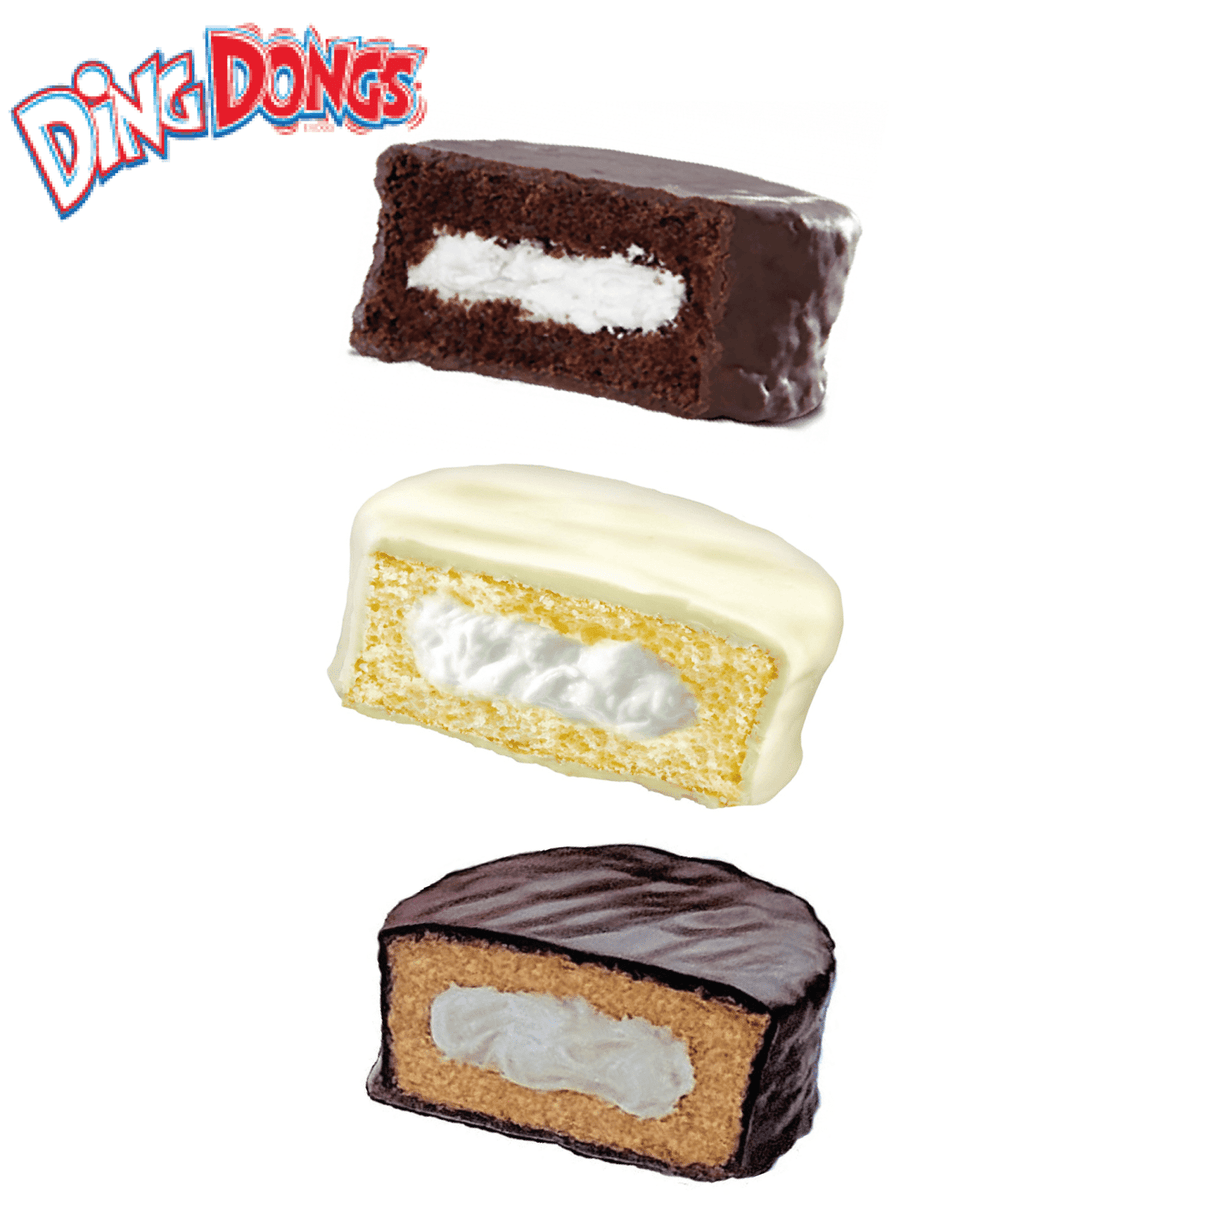 Hostess Ding Dong Essentials (Pack of 3)